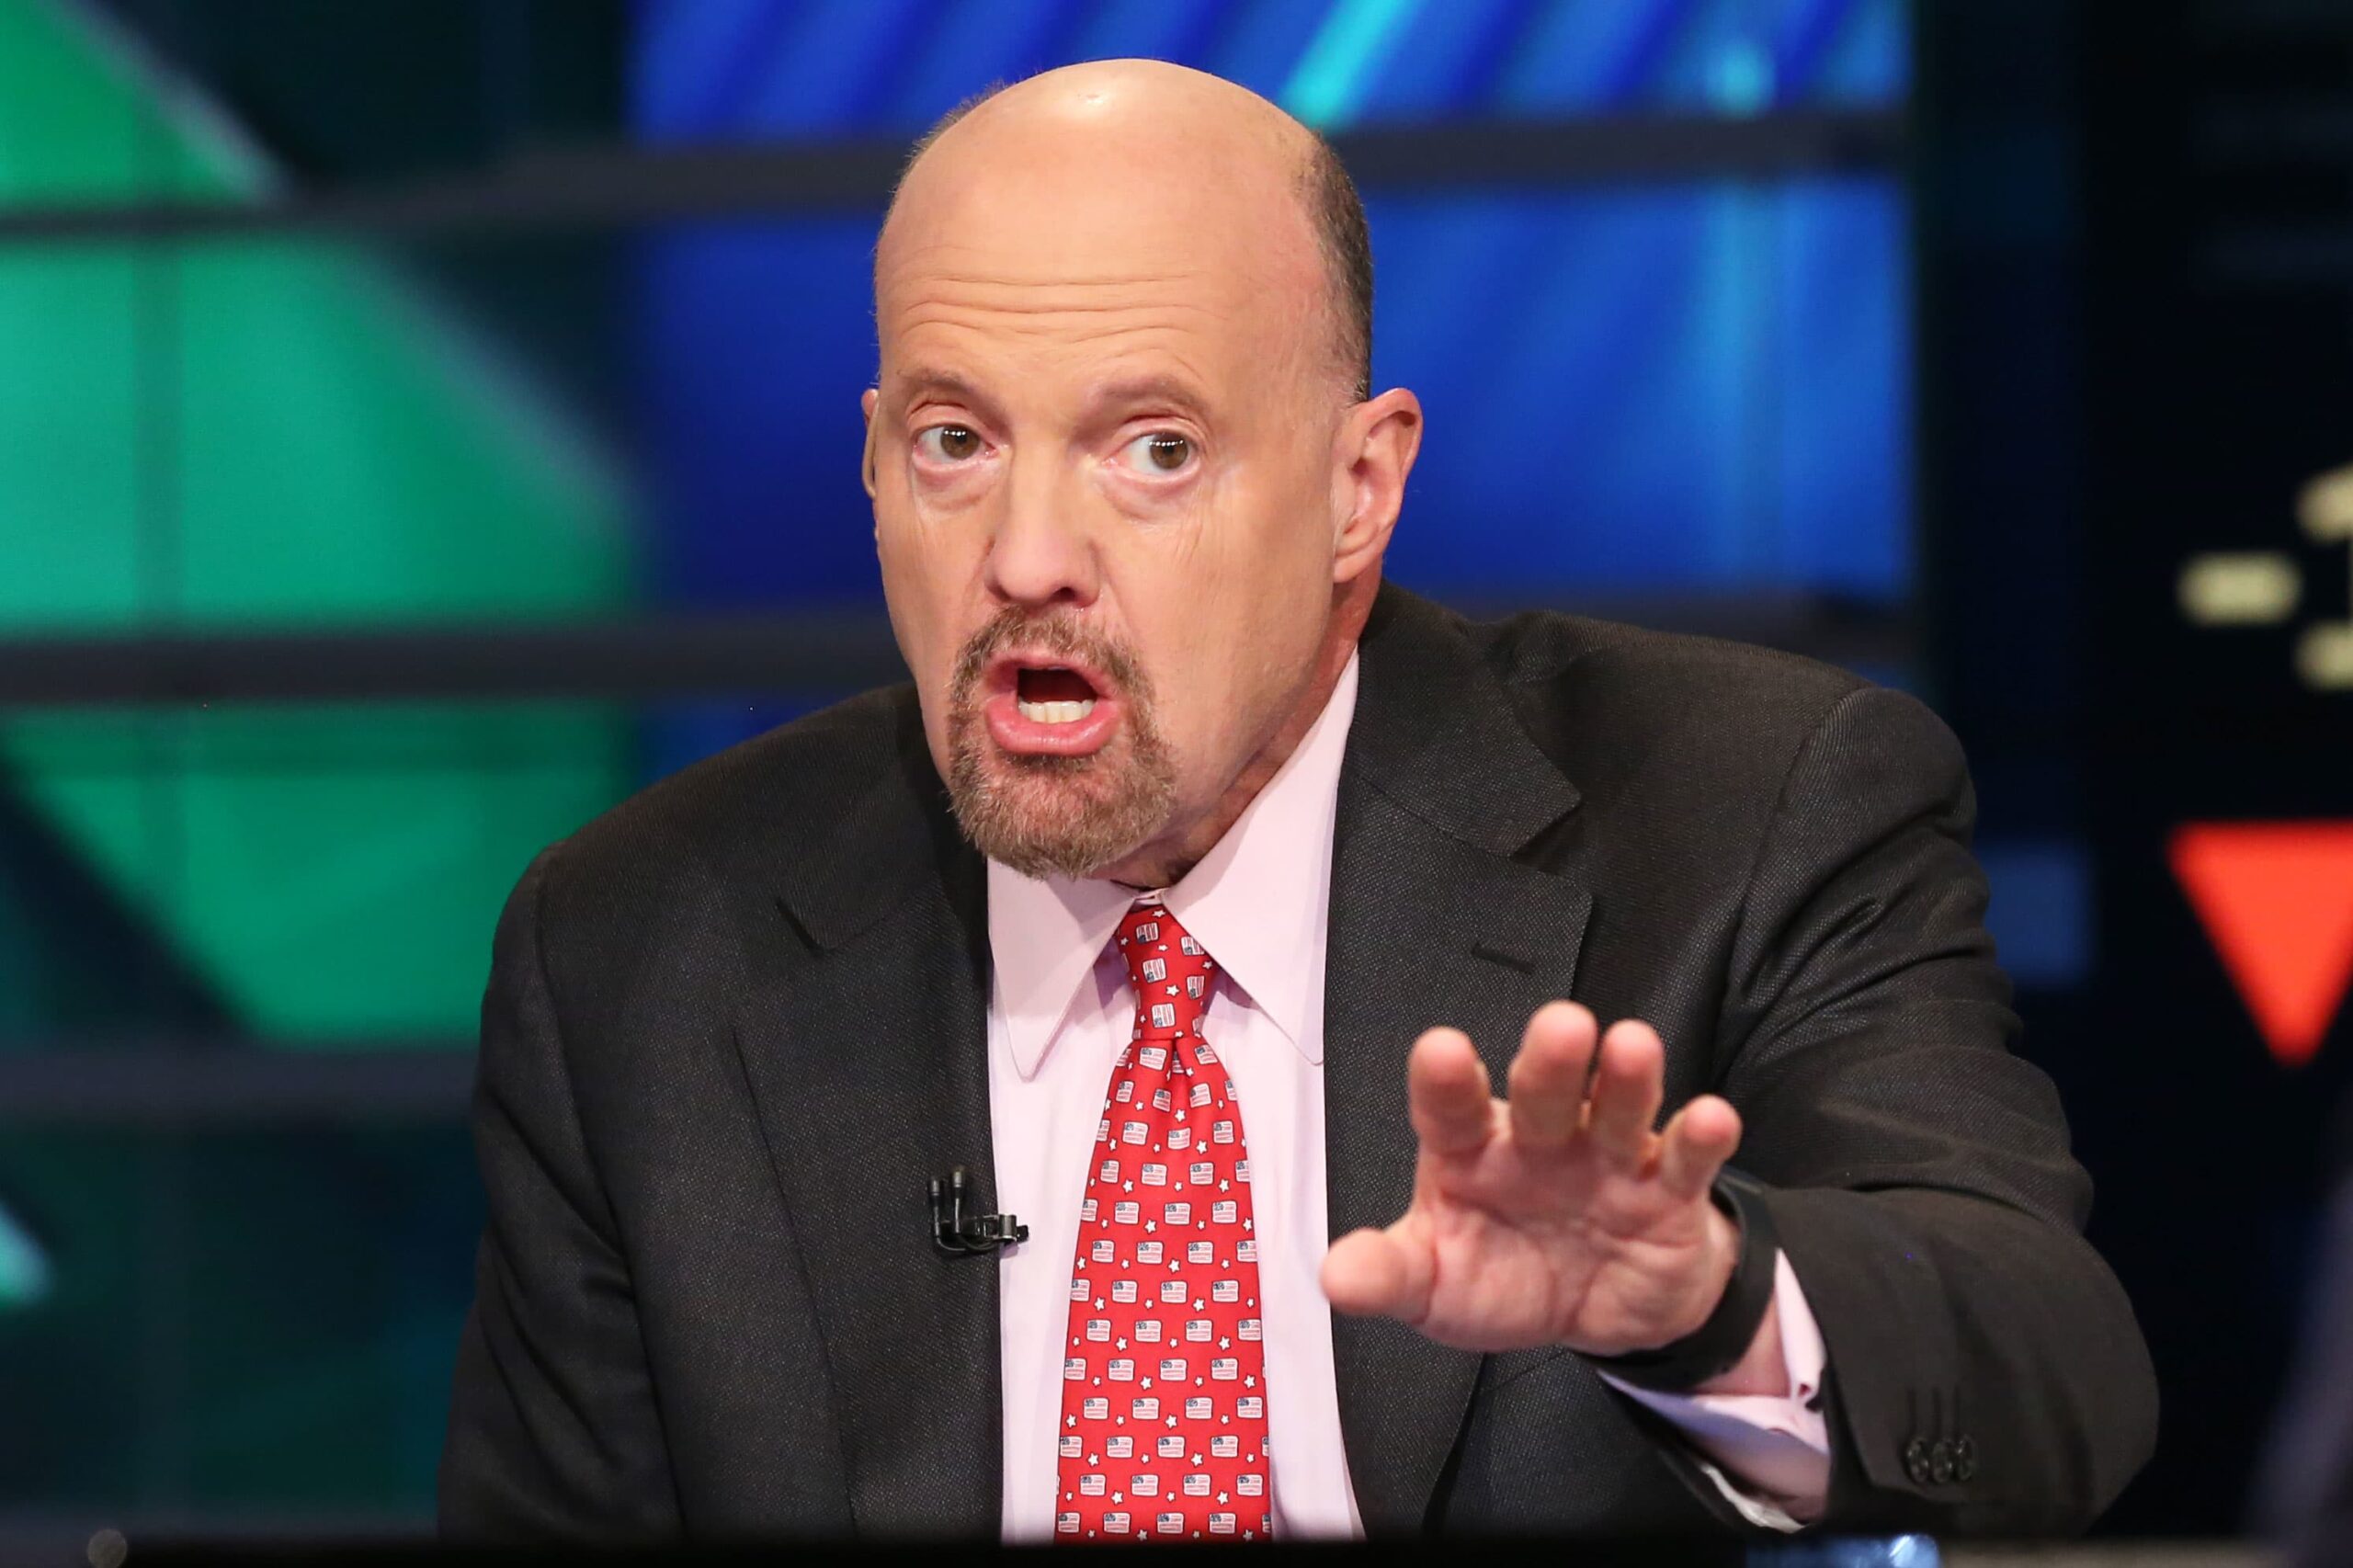 Cramer advises investors to stick with ‘great American companies’ to weather market swings